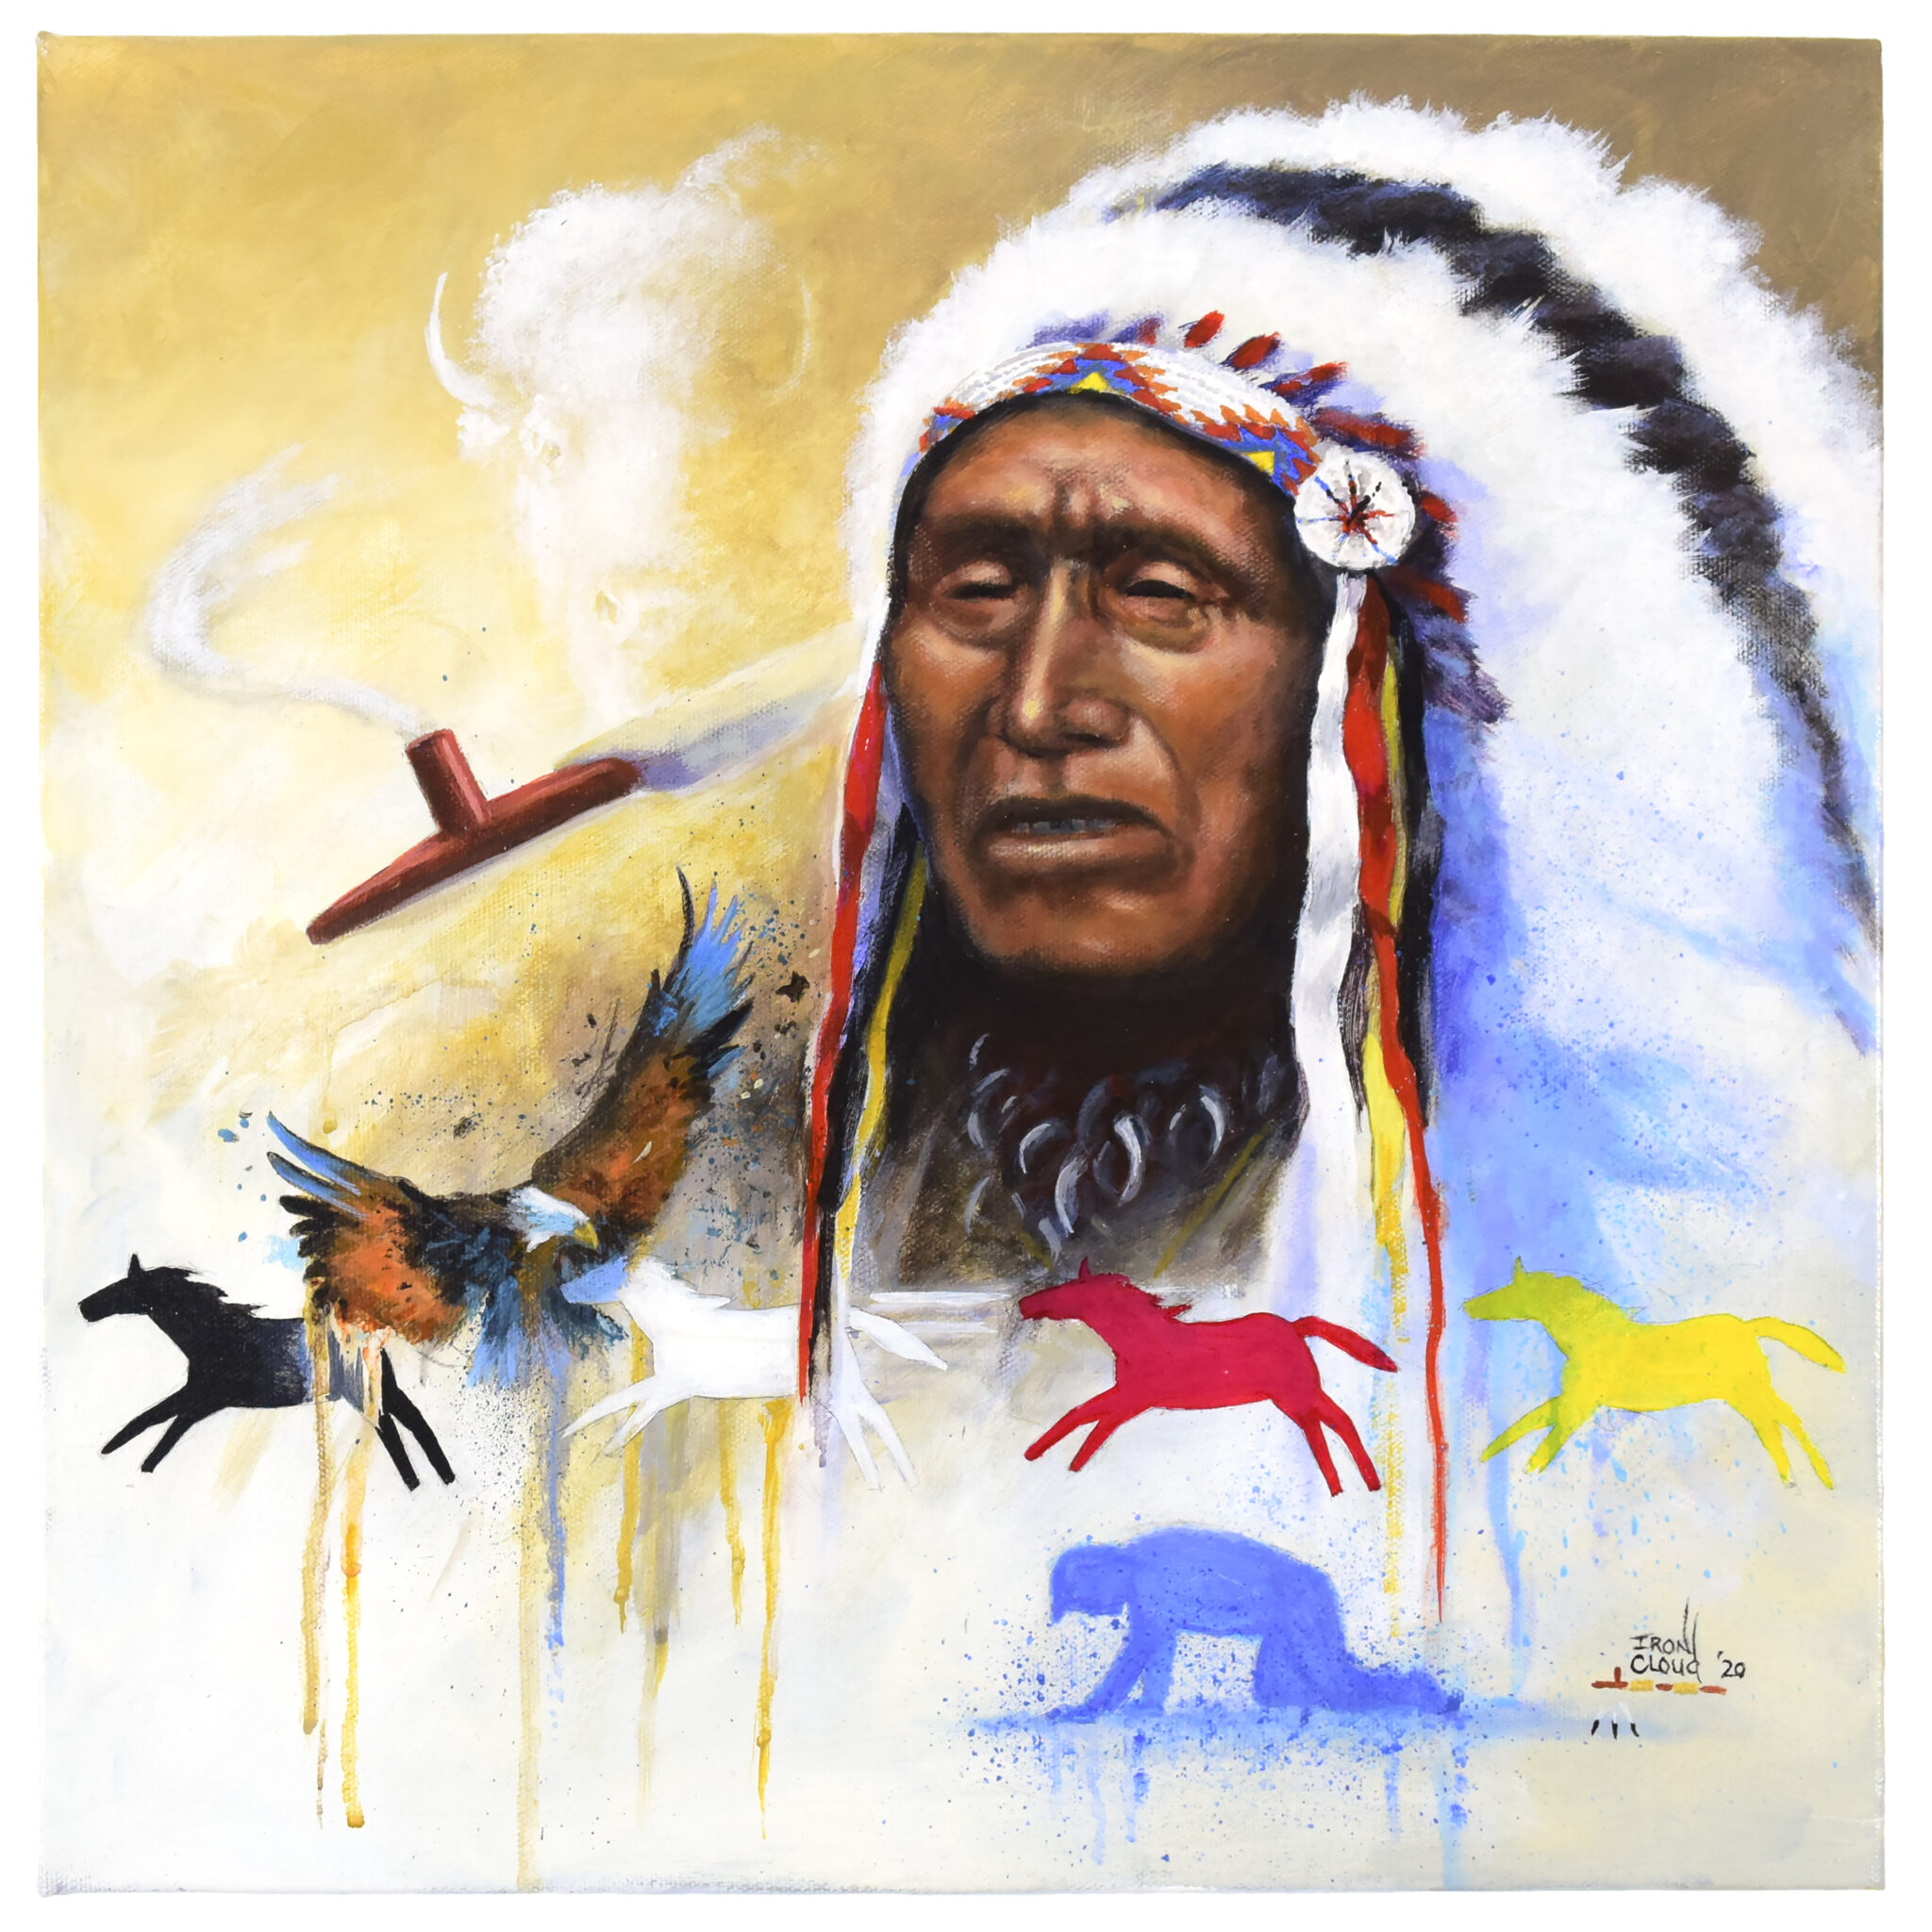 The gift image of Native American